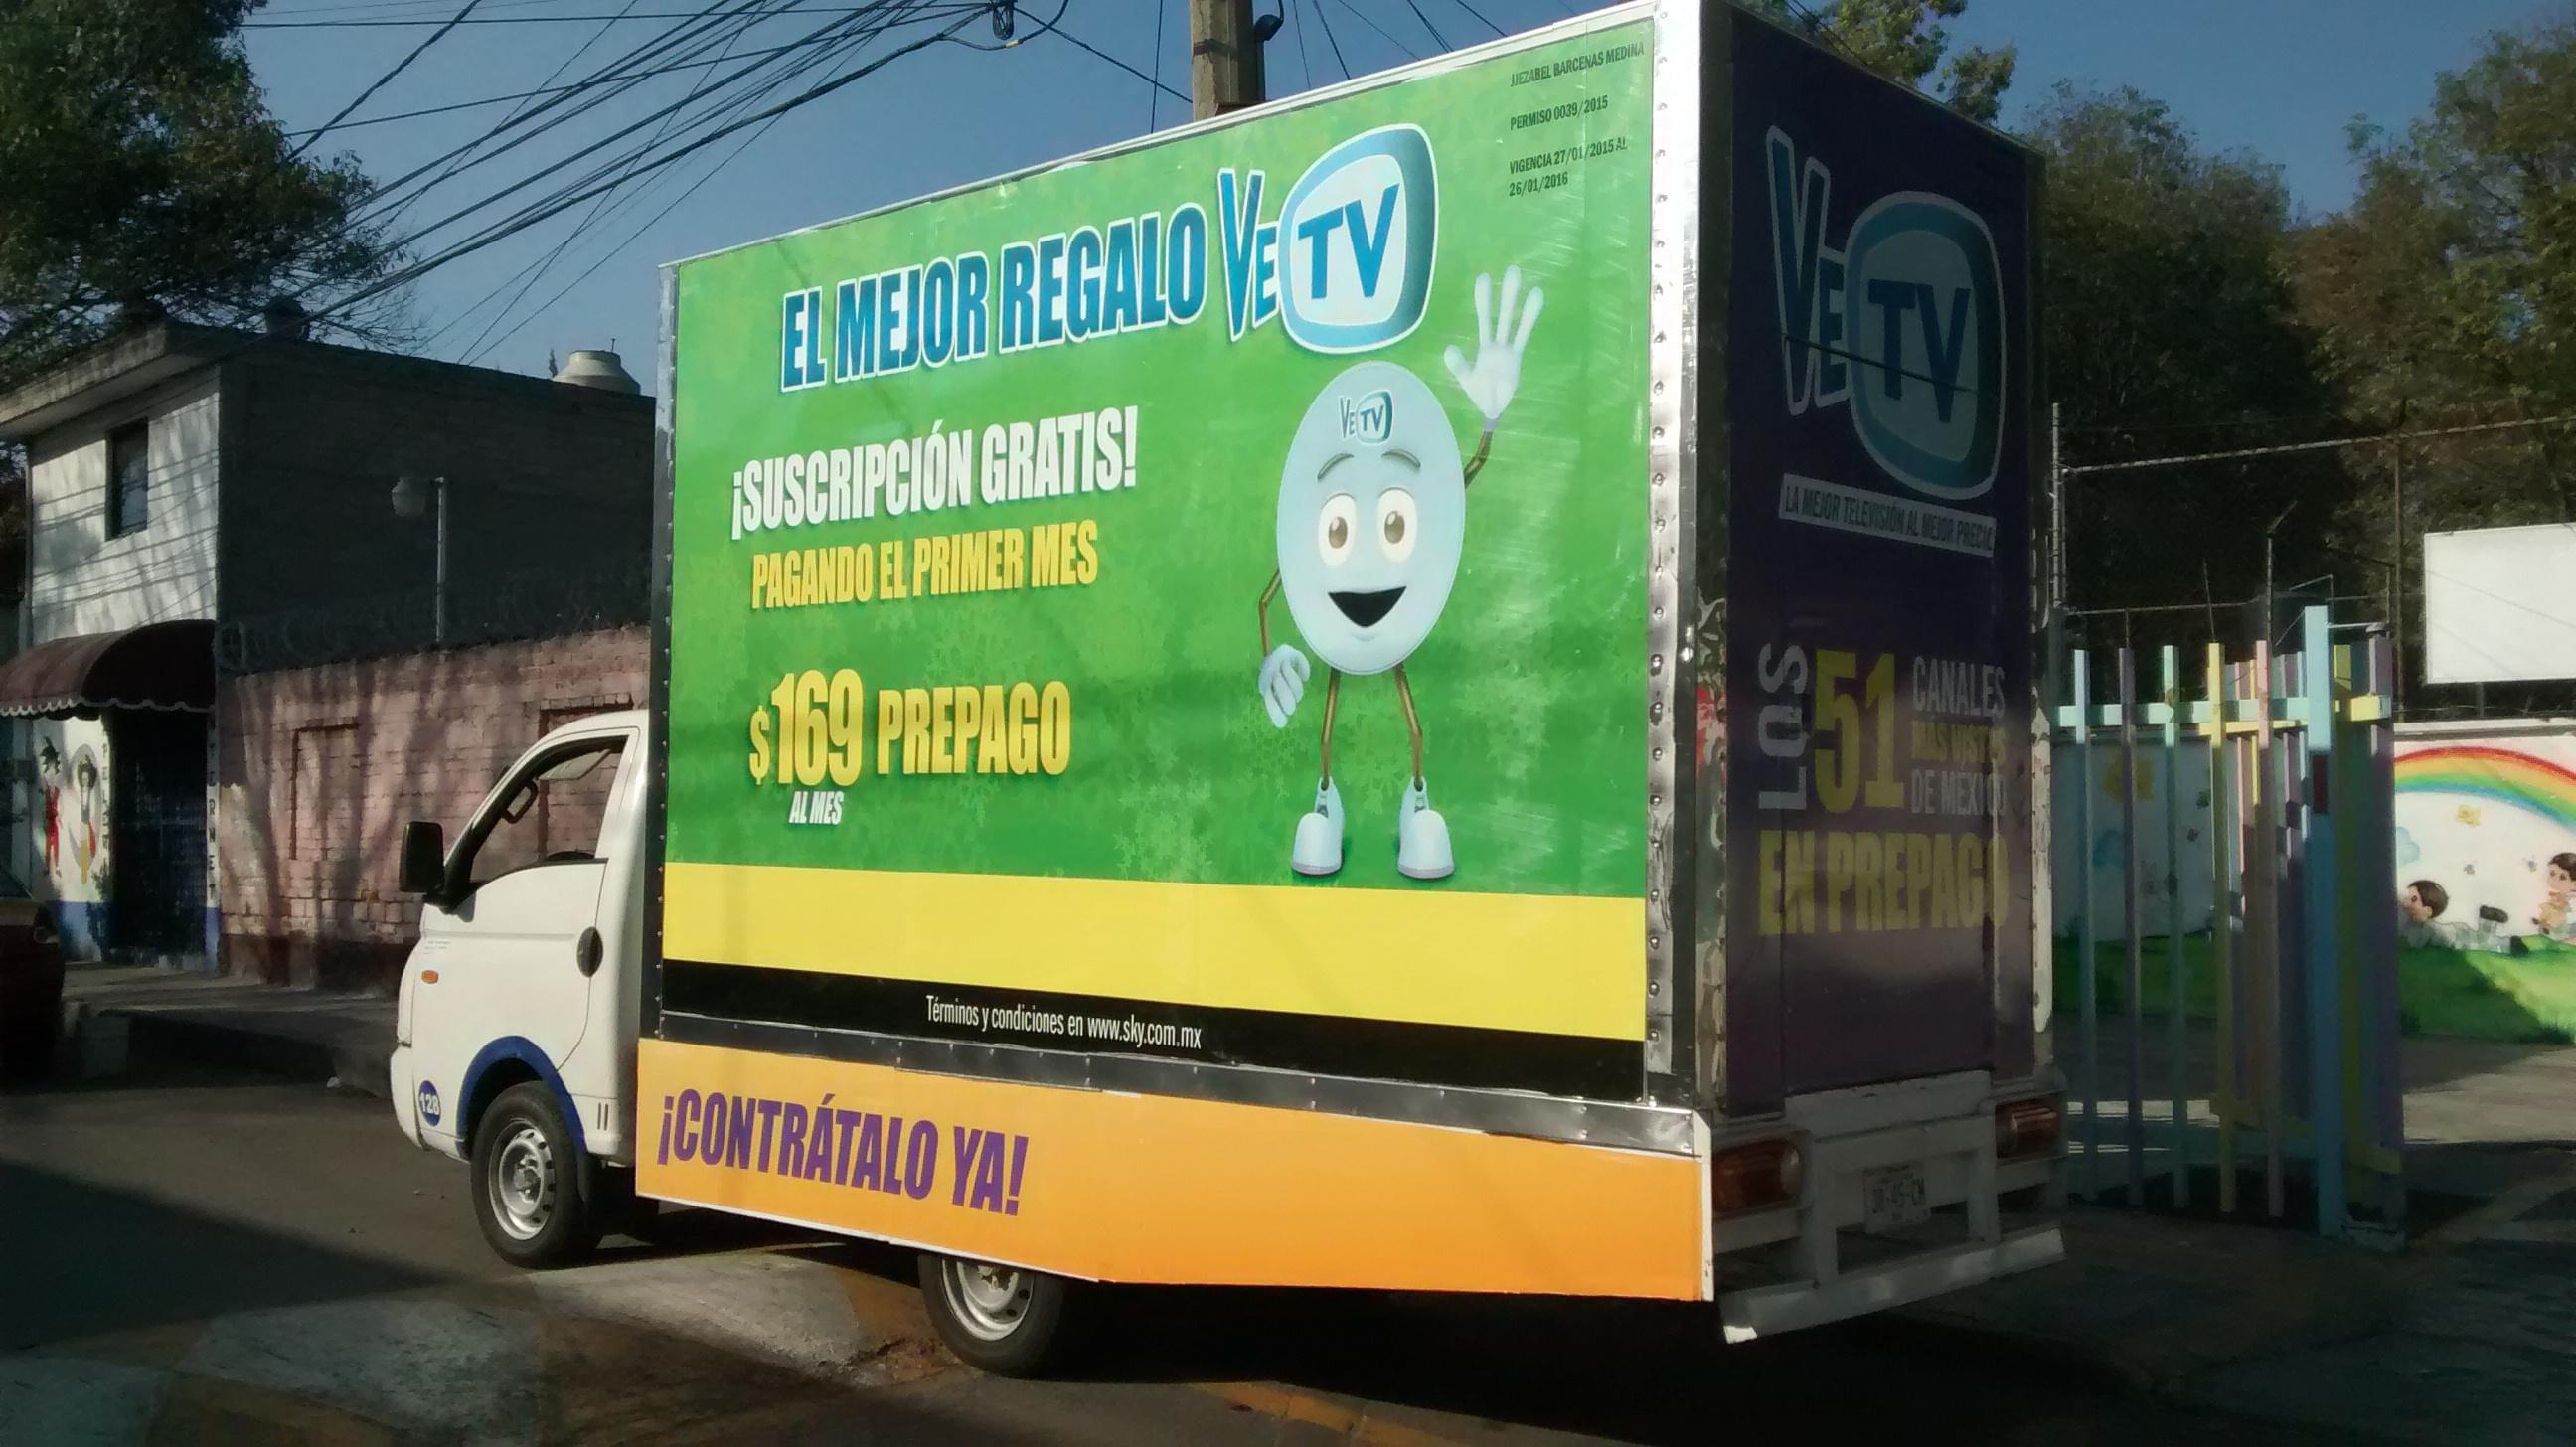 Moving billboards that are 4.50 x 2.50 m are prominent in Mexico